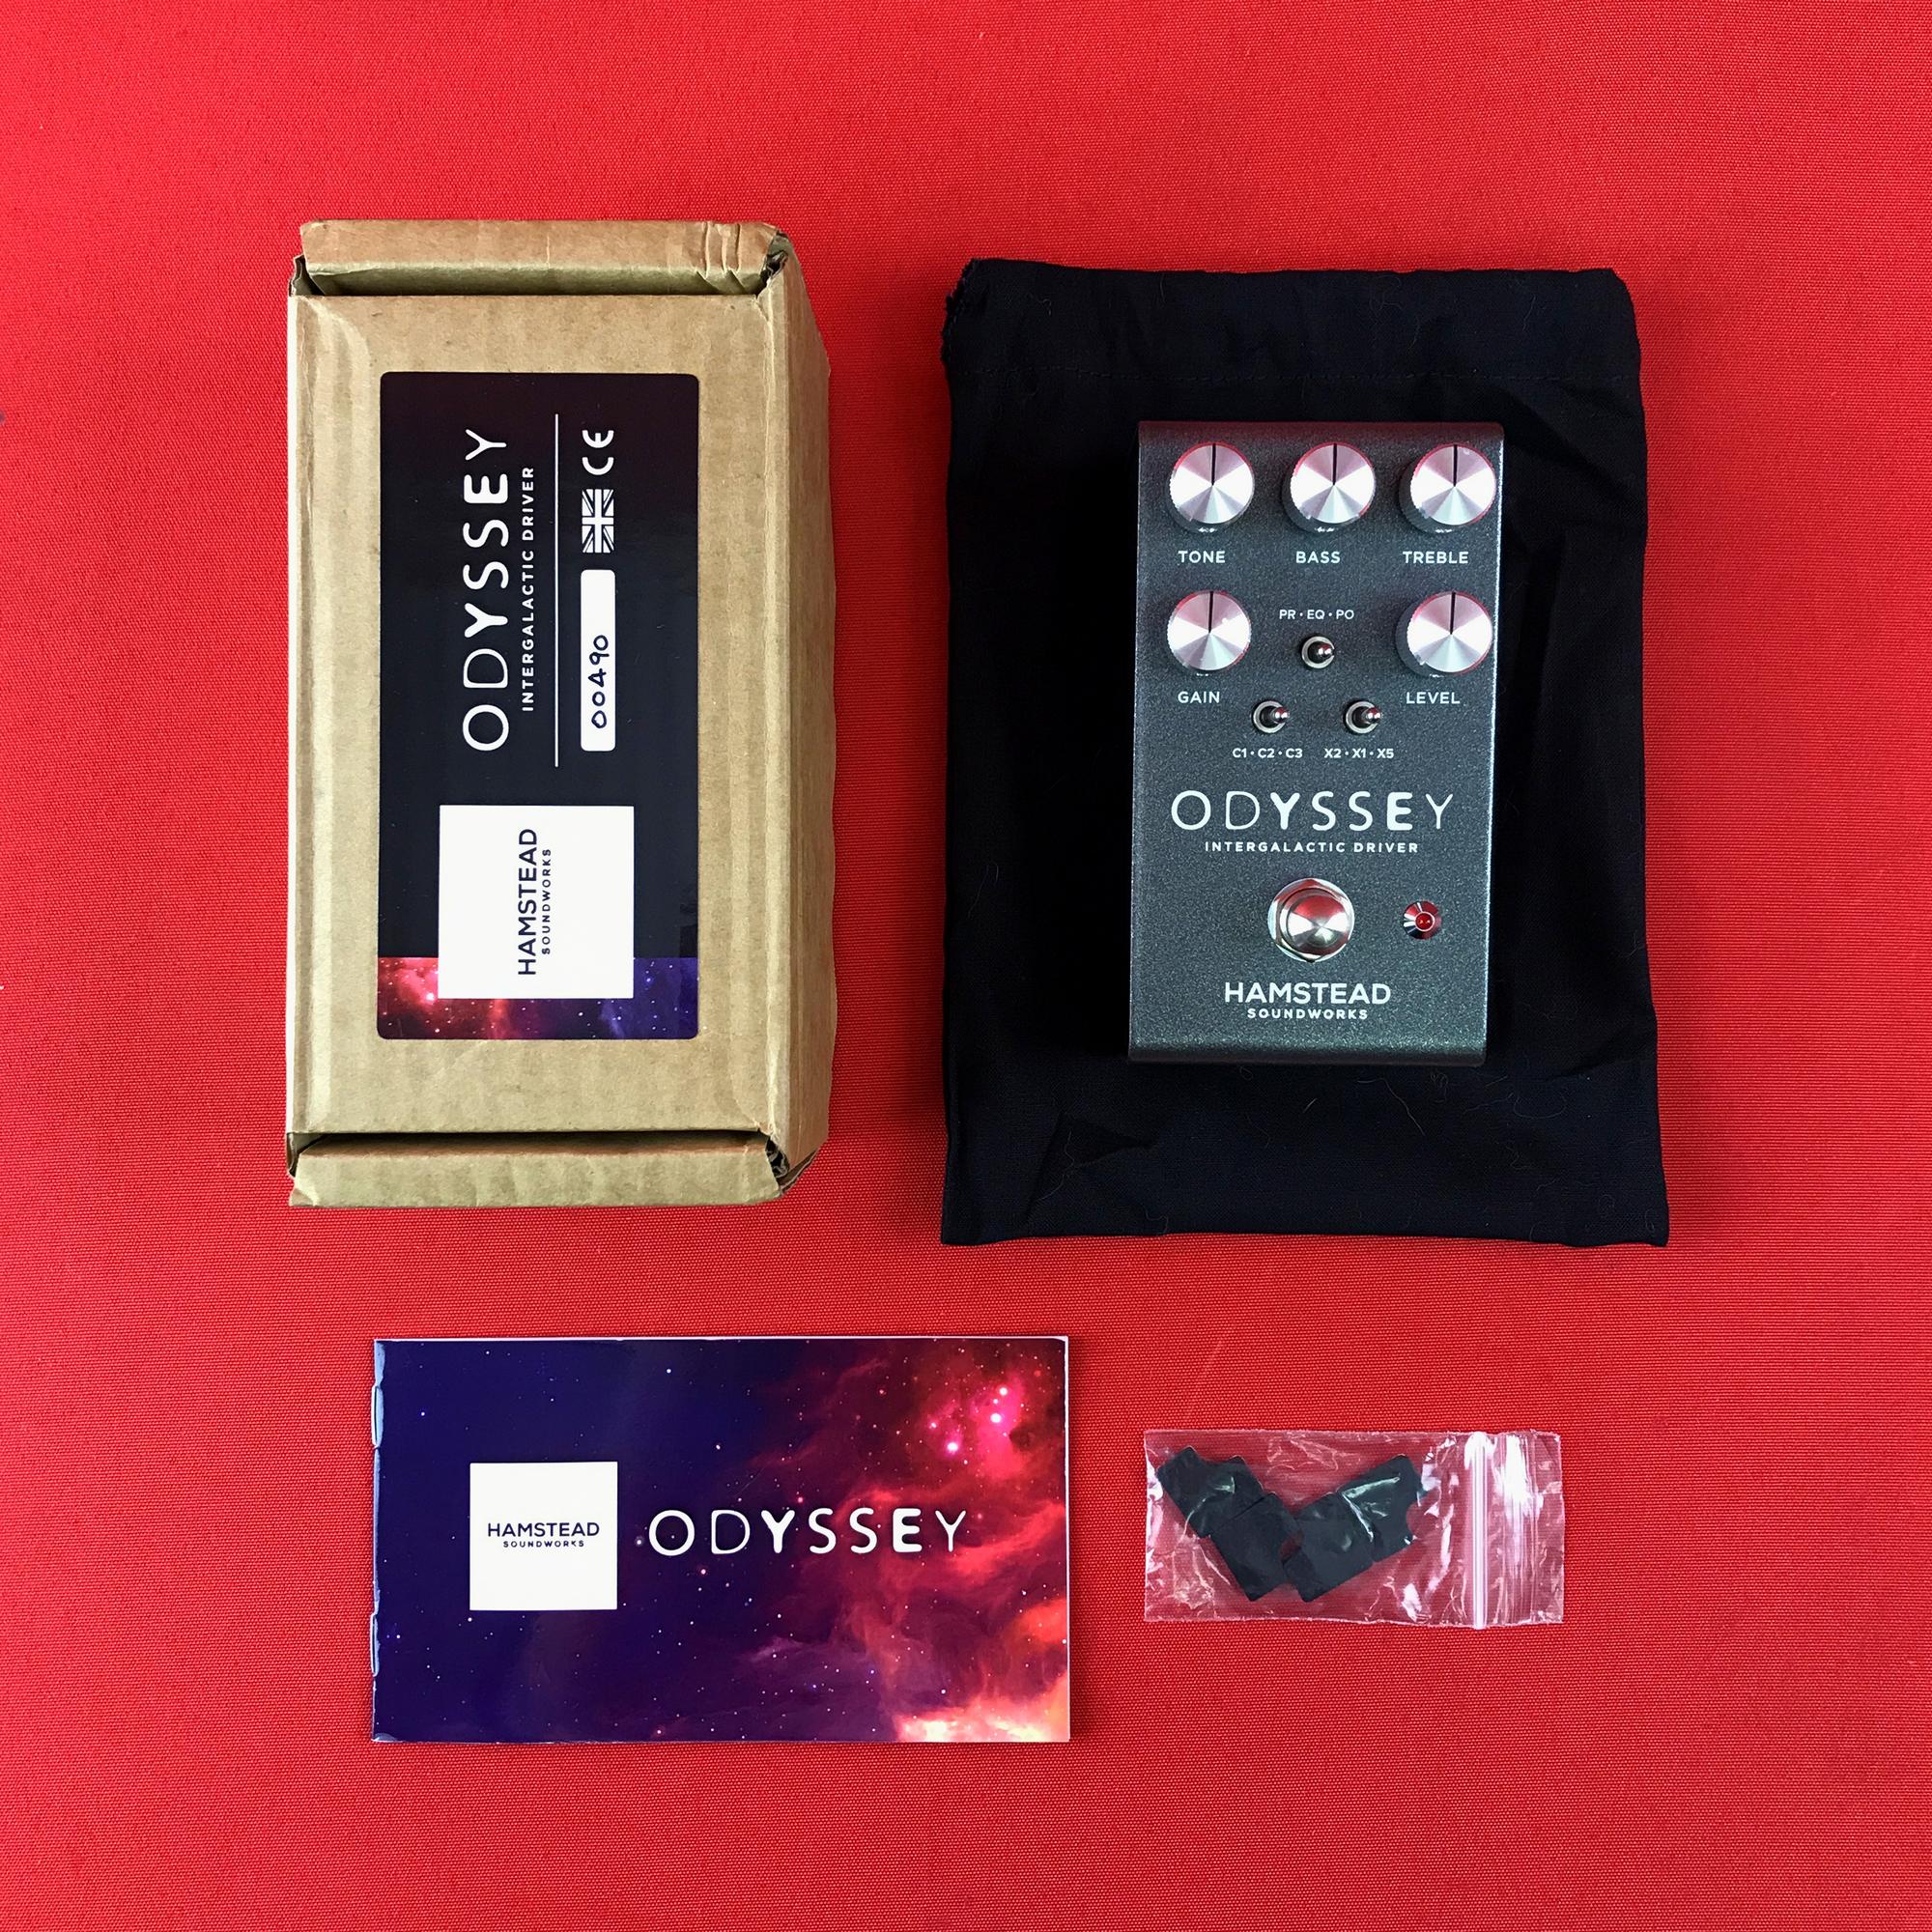 [USED] Hamstead Soundworks Odyssey Intergalactic Driver Overdrive